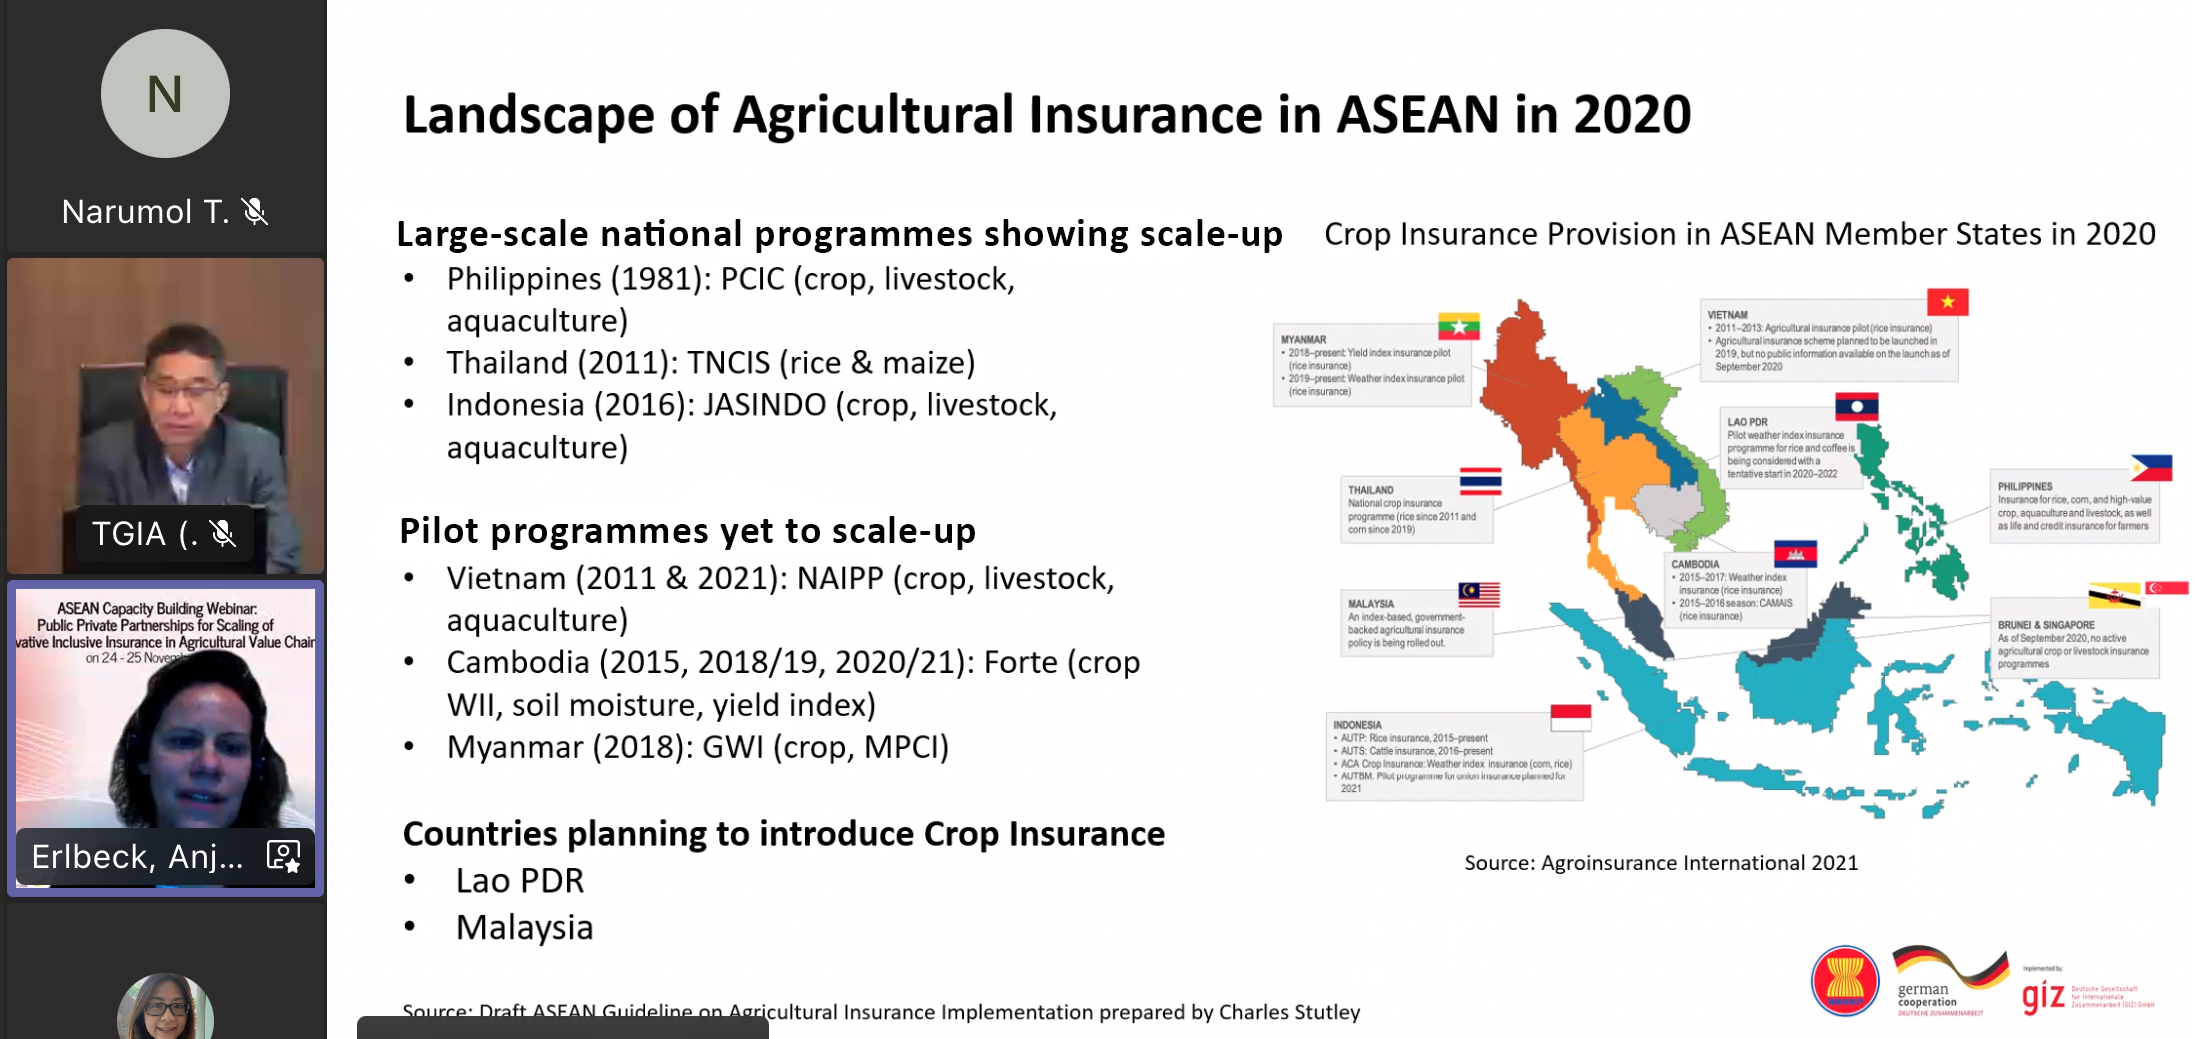 Anja Erlbeck, GIZ Director of the Climate Risk Financing in Cooperation with ASEAN presented the landscape of agricultural insurance in ASEAN.